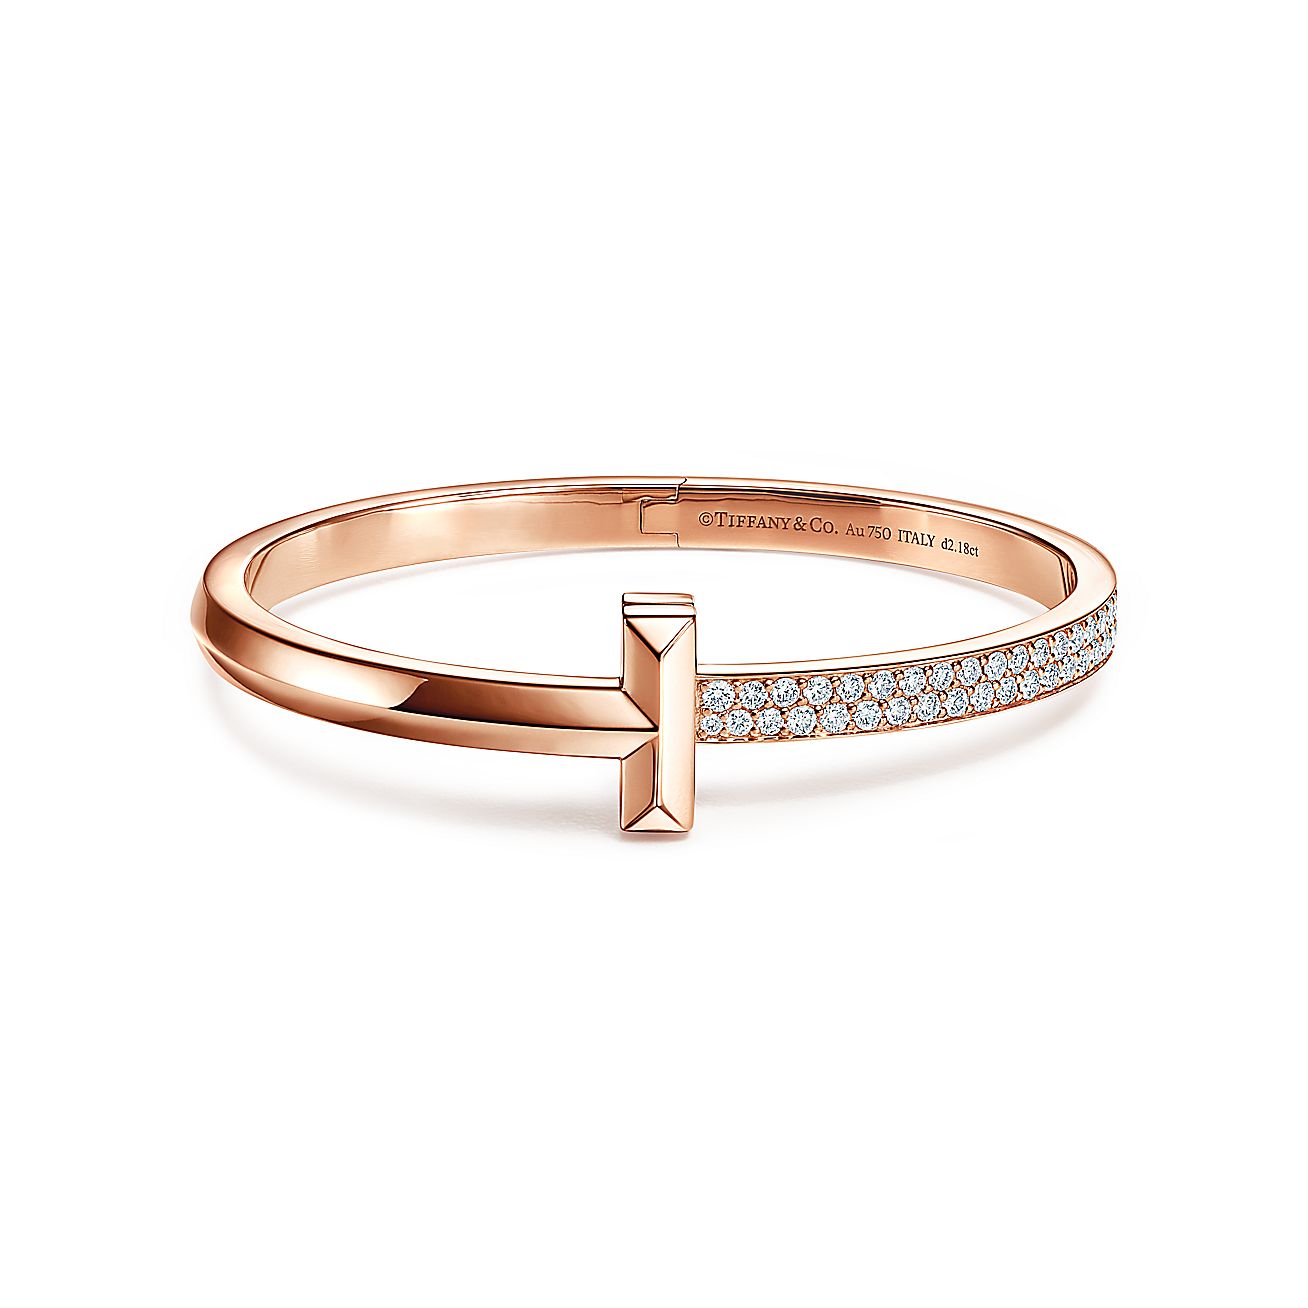 Tiffany T T1 Hinged Bangle In Rose Gold Wide Tiffany Co